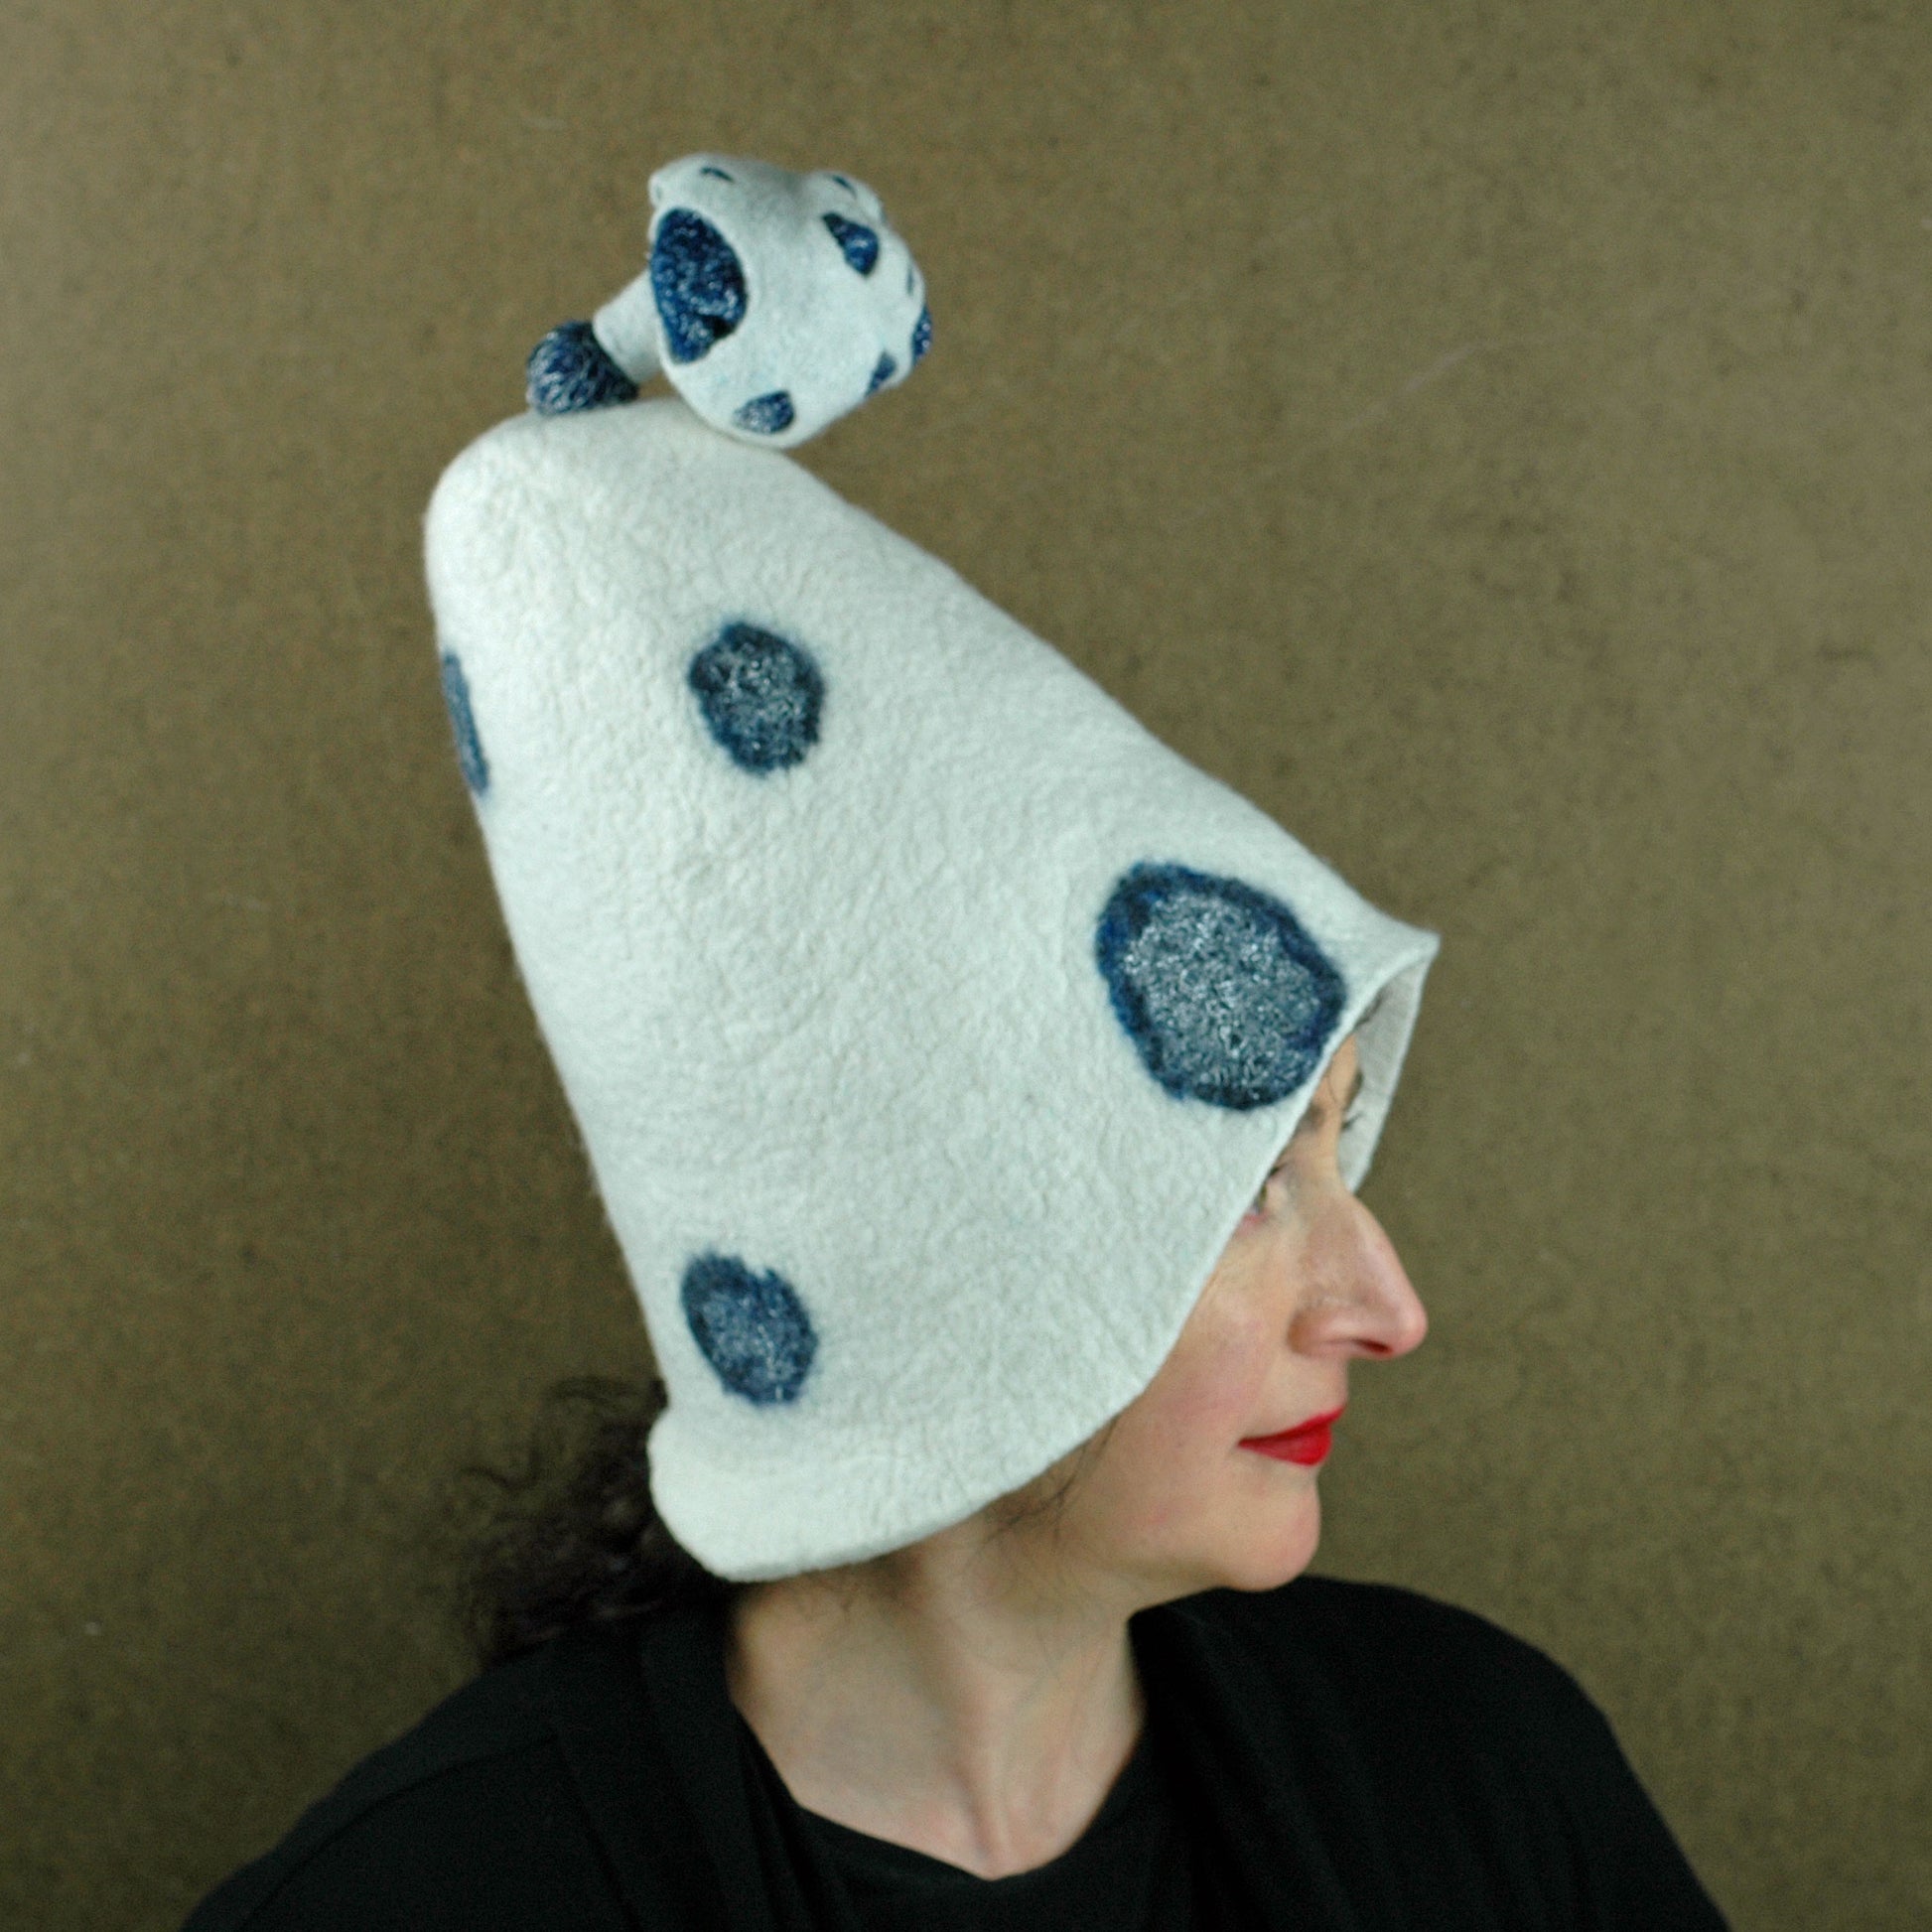 White Mushroom Hat with Blue Polka Dots - side view